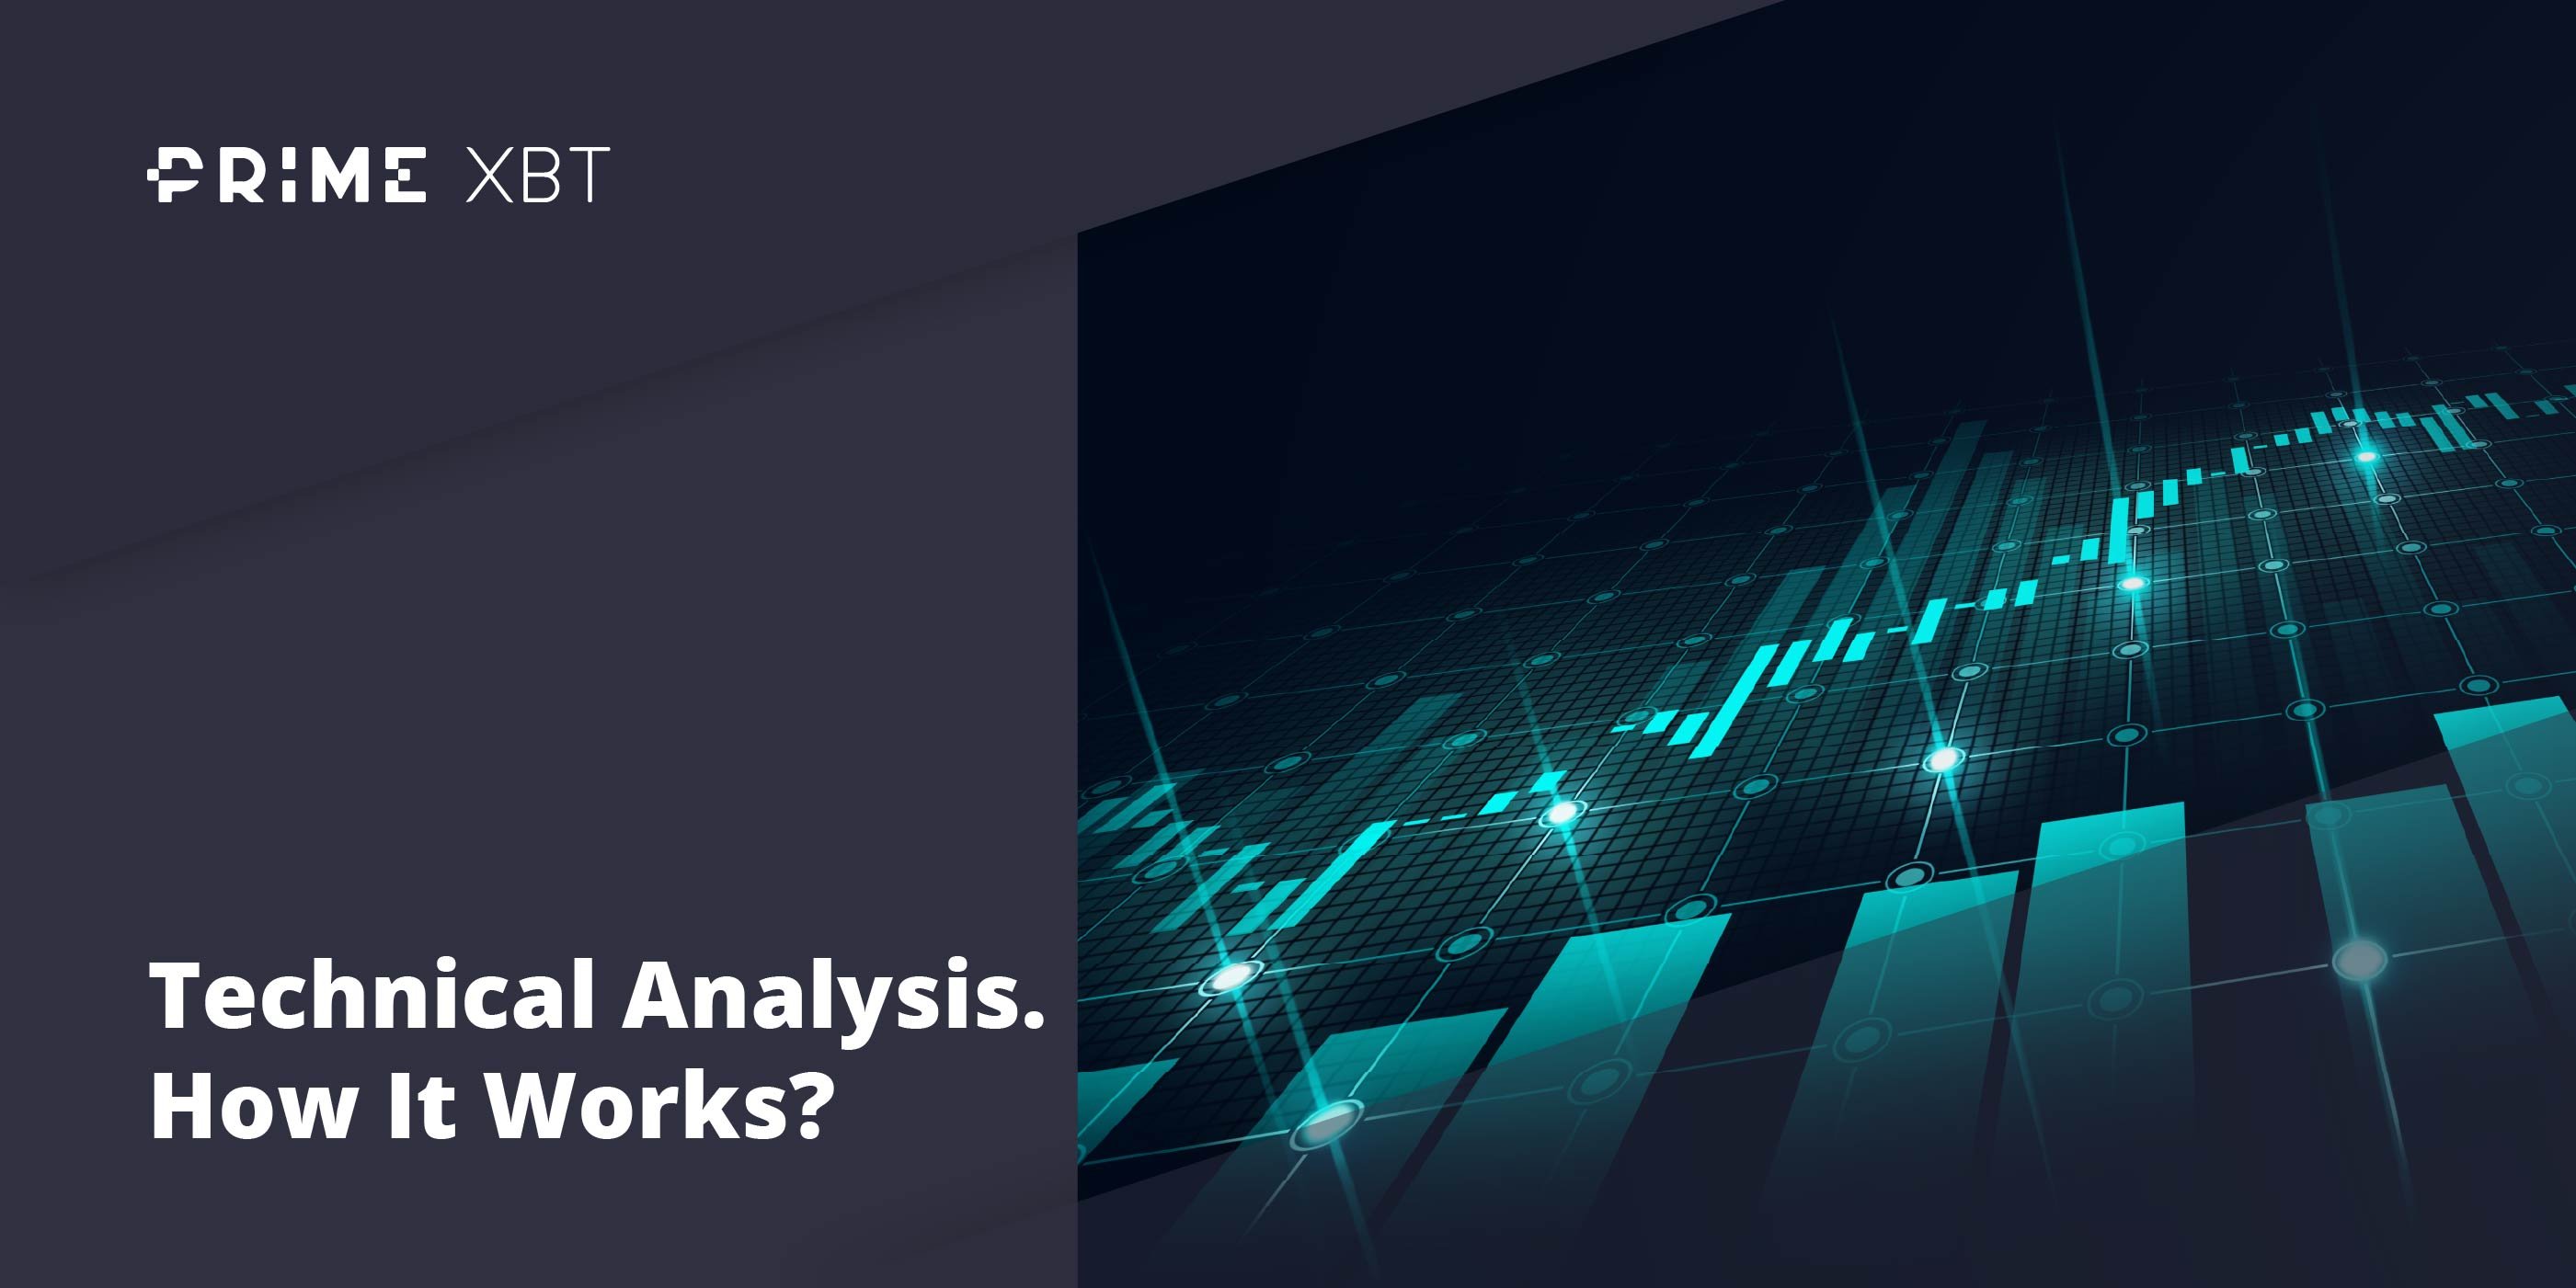 Technical Analysis: Definition, Tools & Examples - 26.11.19